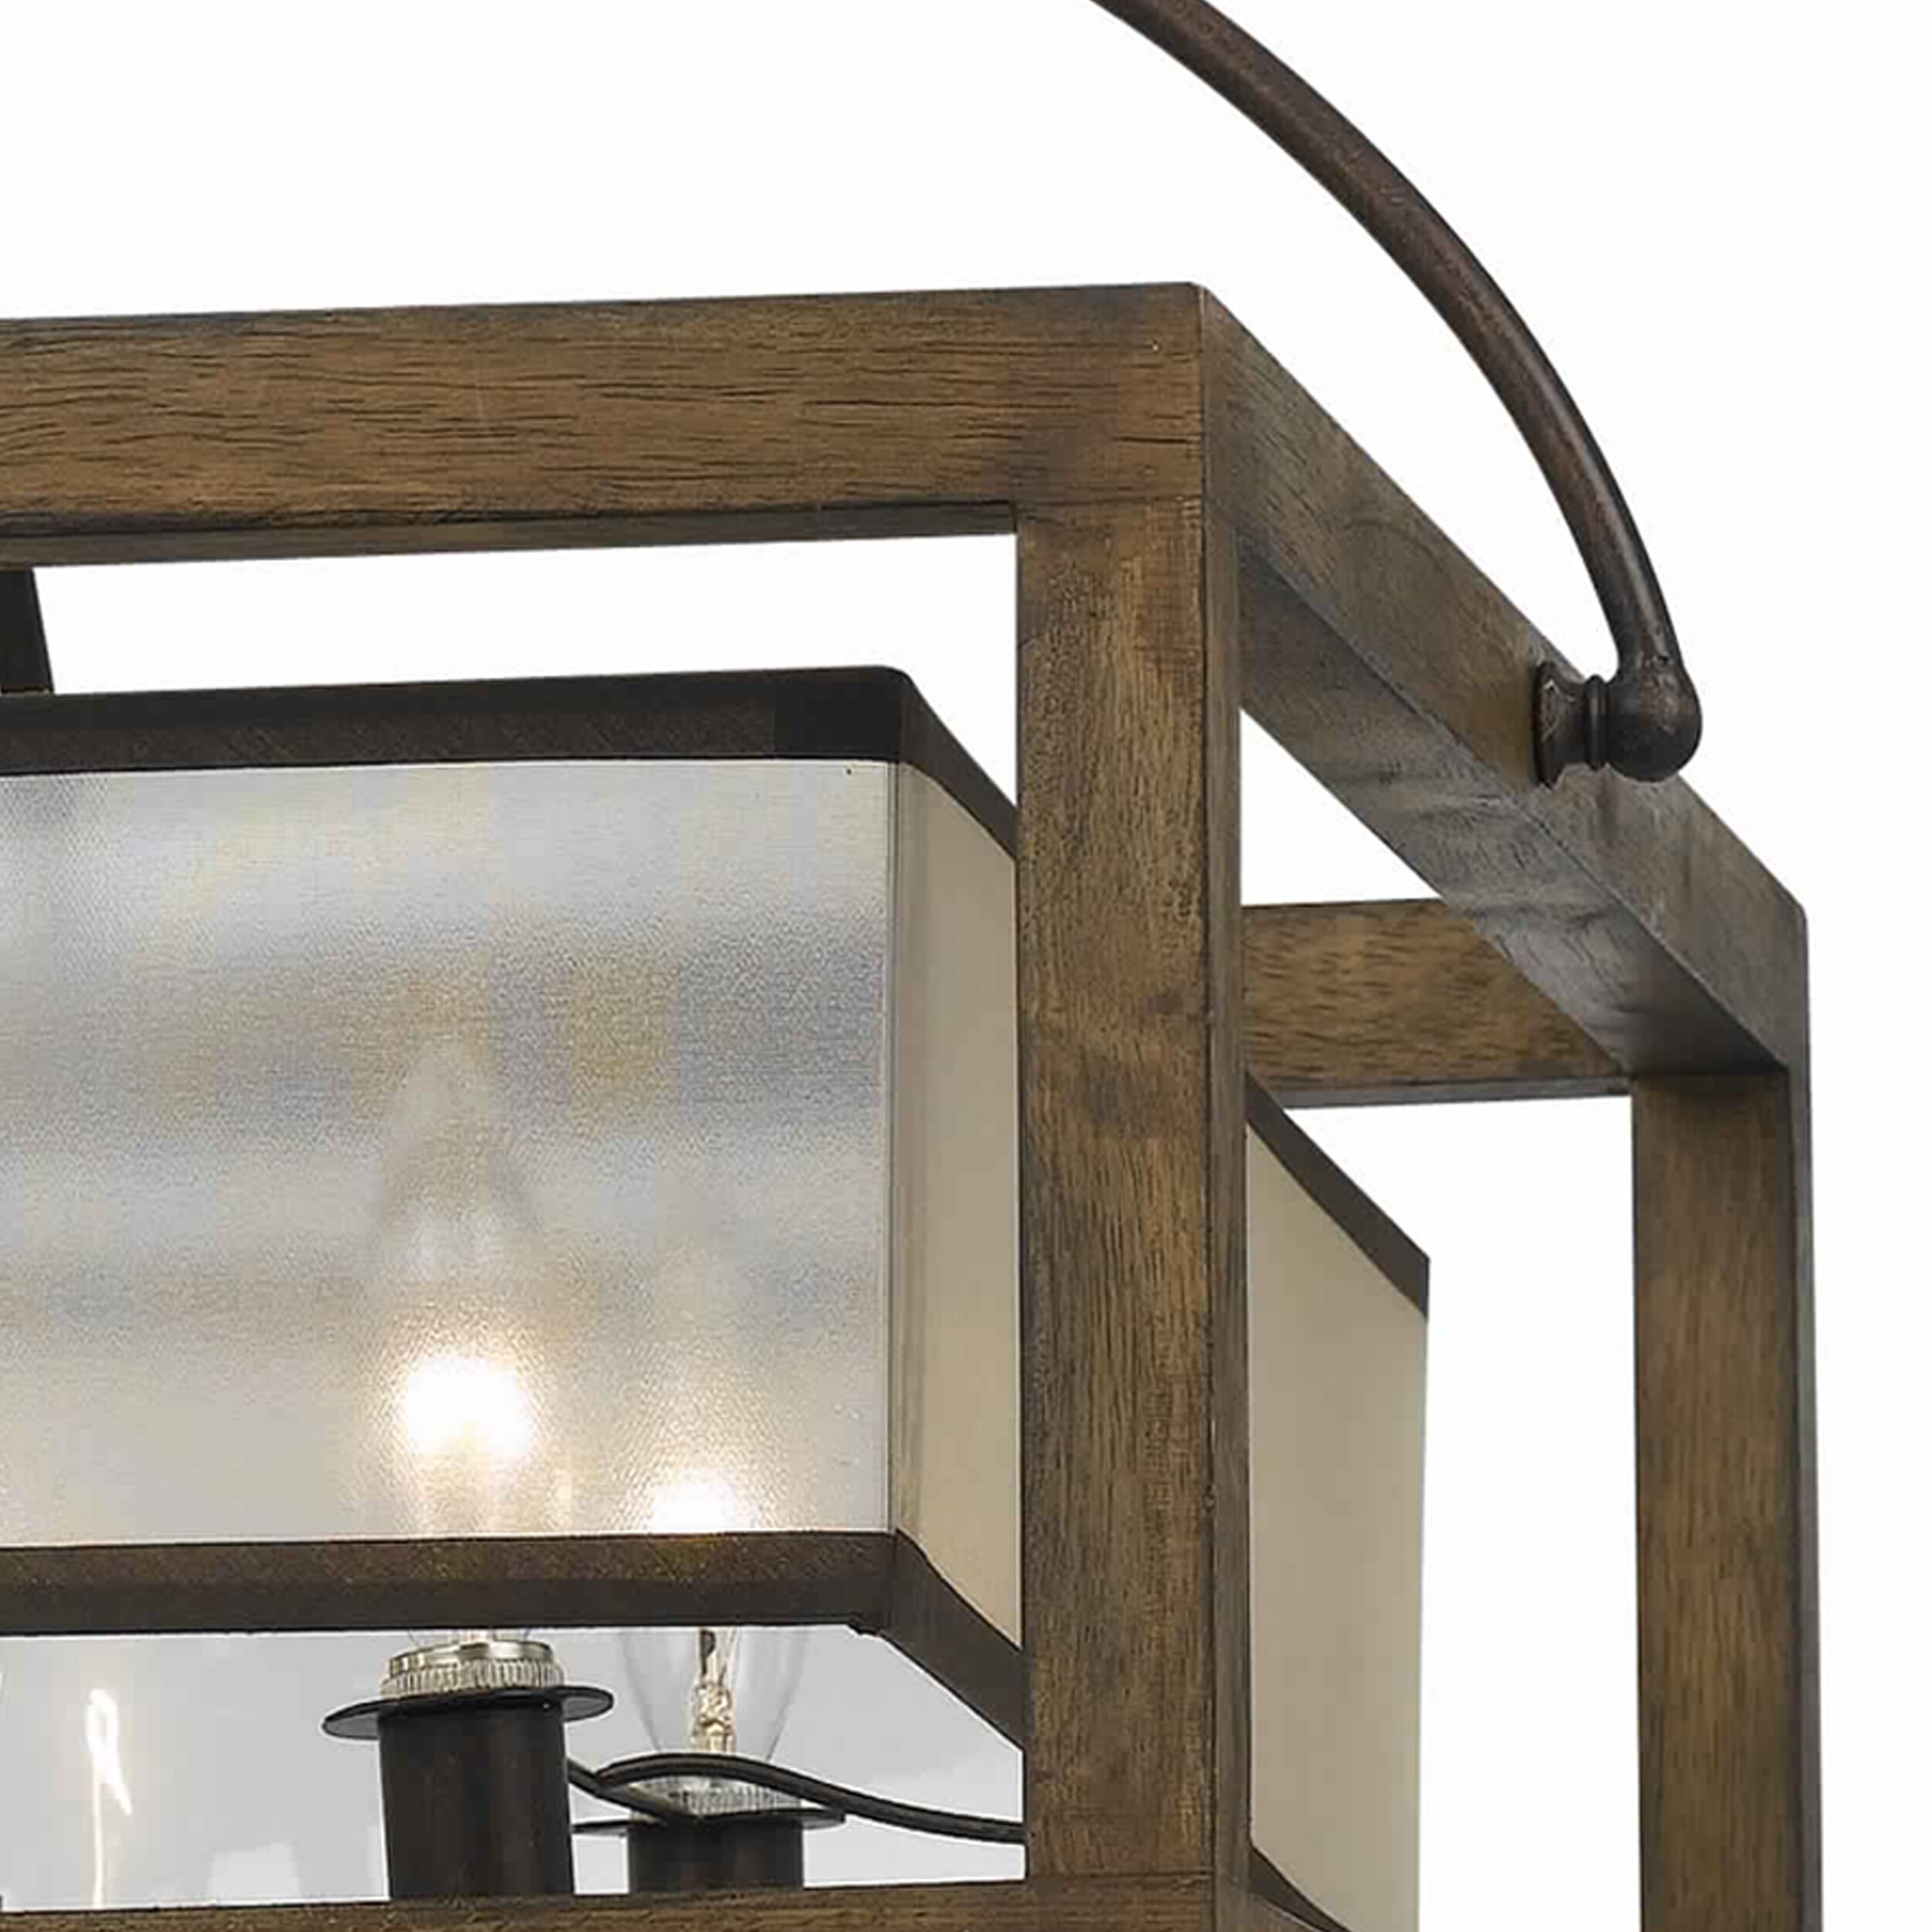 6 Bulb Square Chandelier with Wooden Frame and Organza Striped Shade, Brown - image 3 of 5